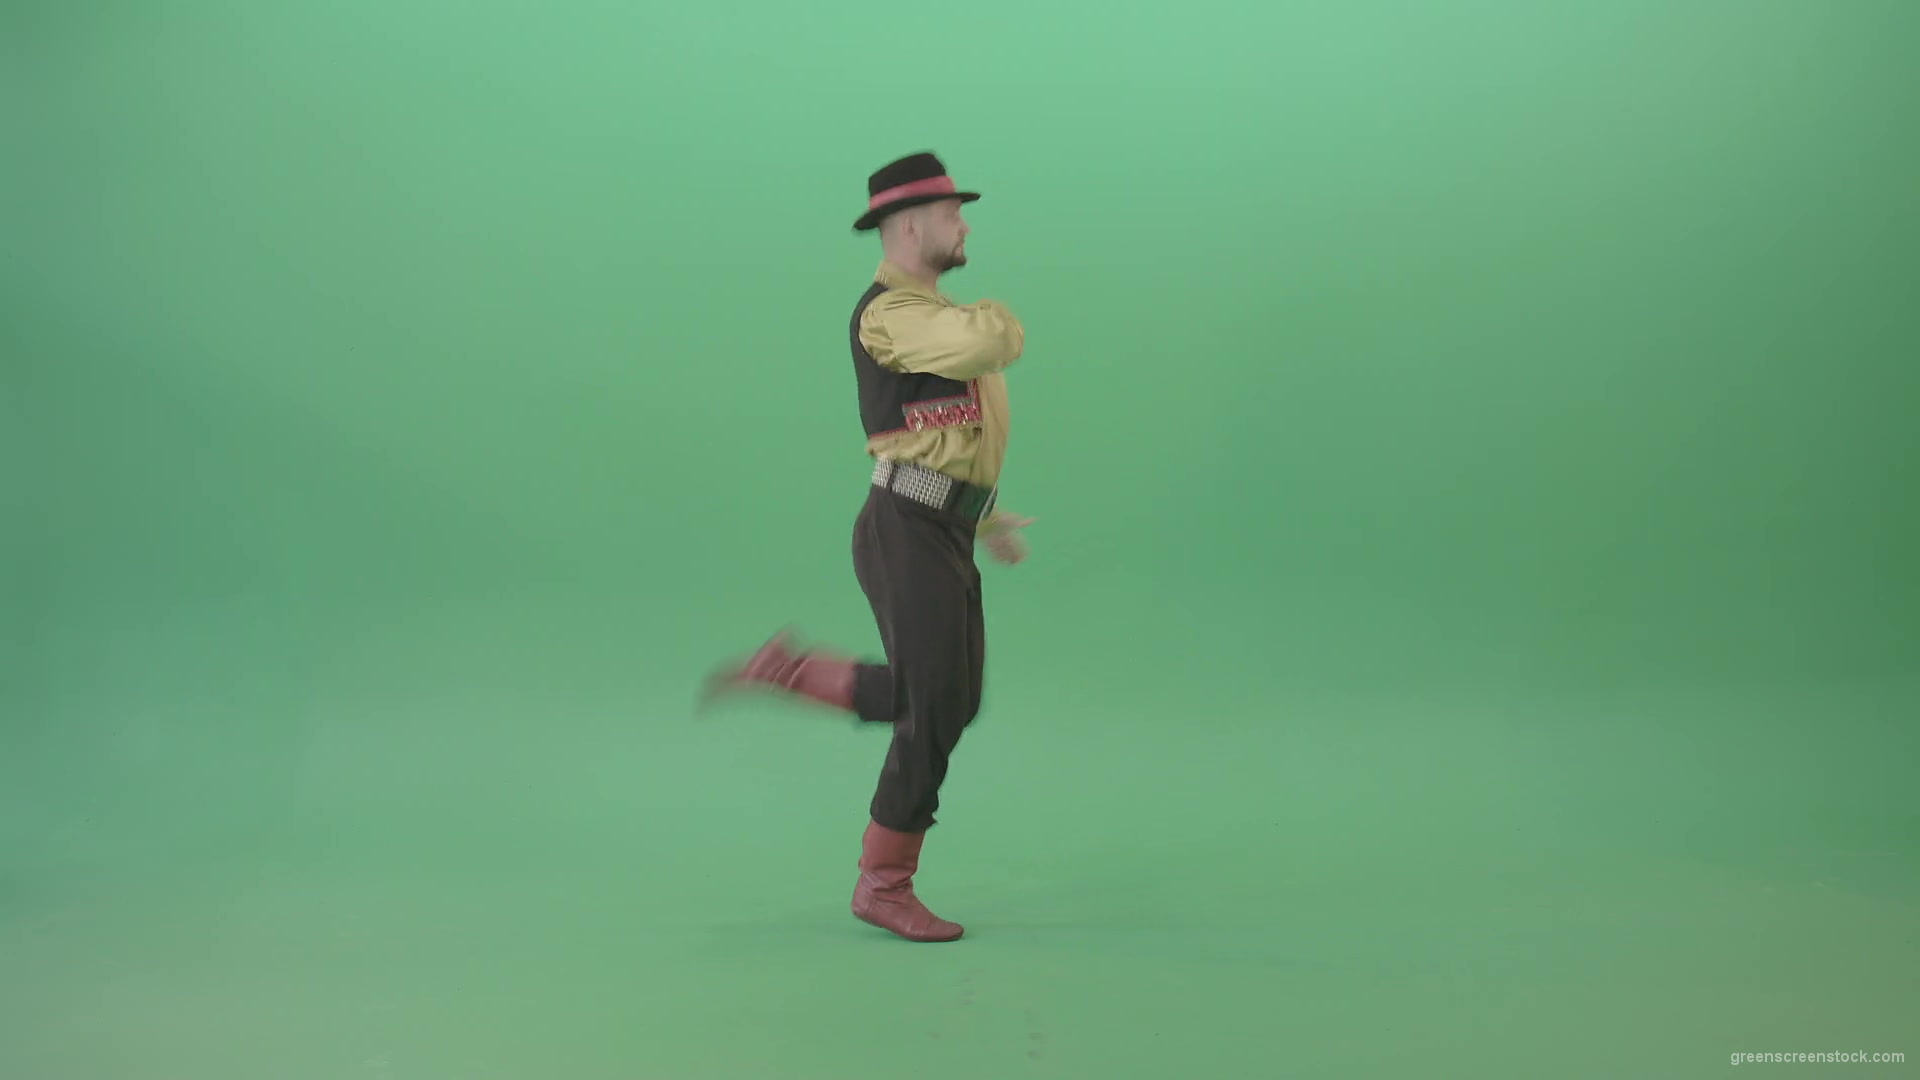 Romanian-Gypsy-Man-dancing-with-clapping-hand-with-side-view-isolated-4K-Green-Screen-Video-Footage-1920_002 Green Screen Stock